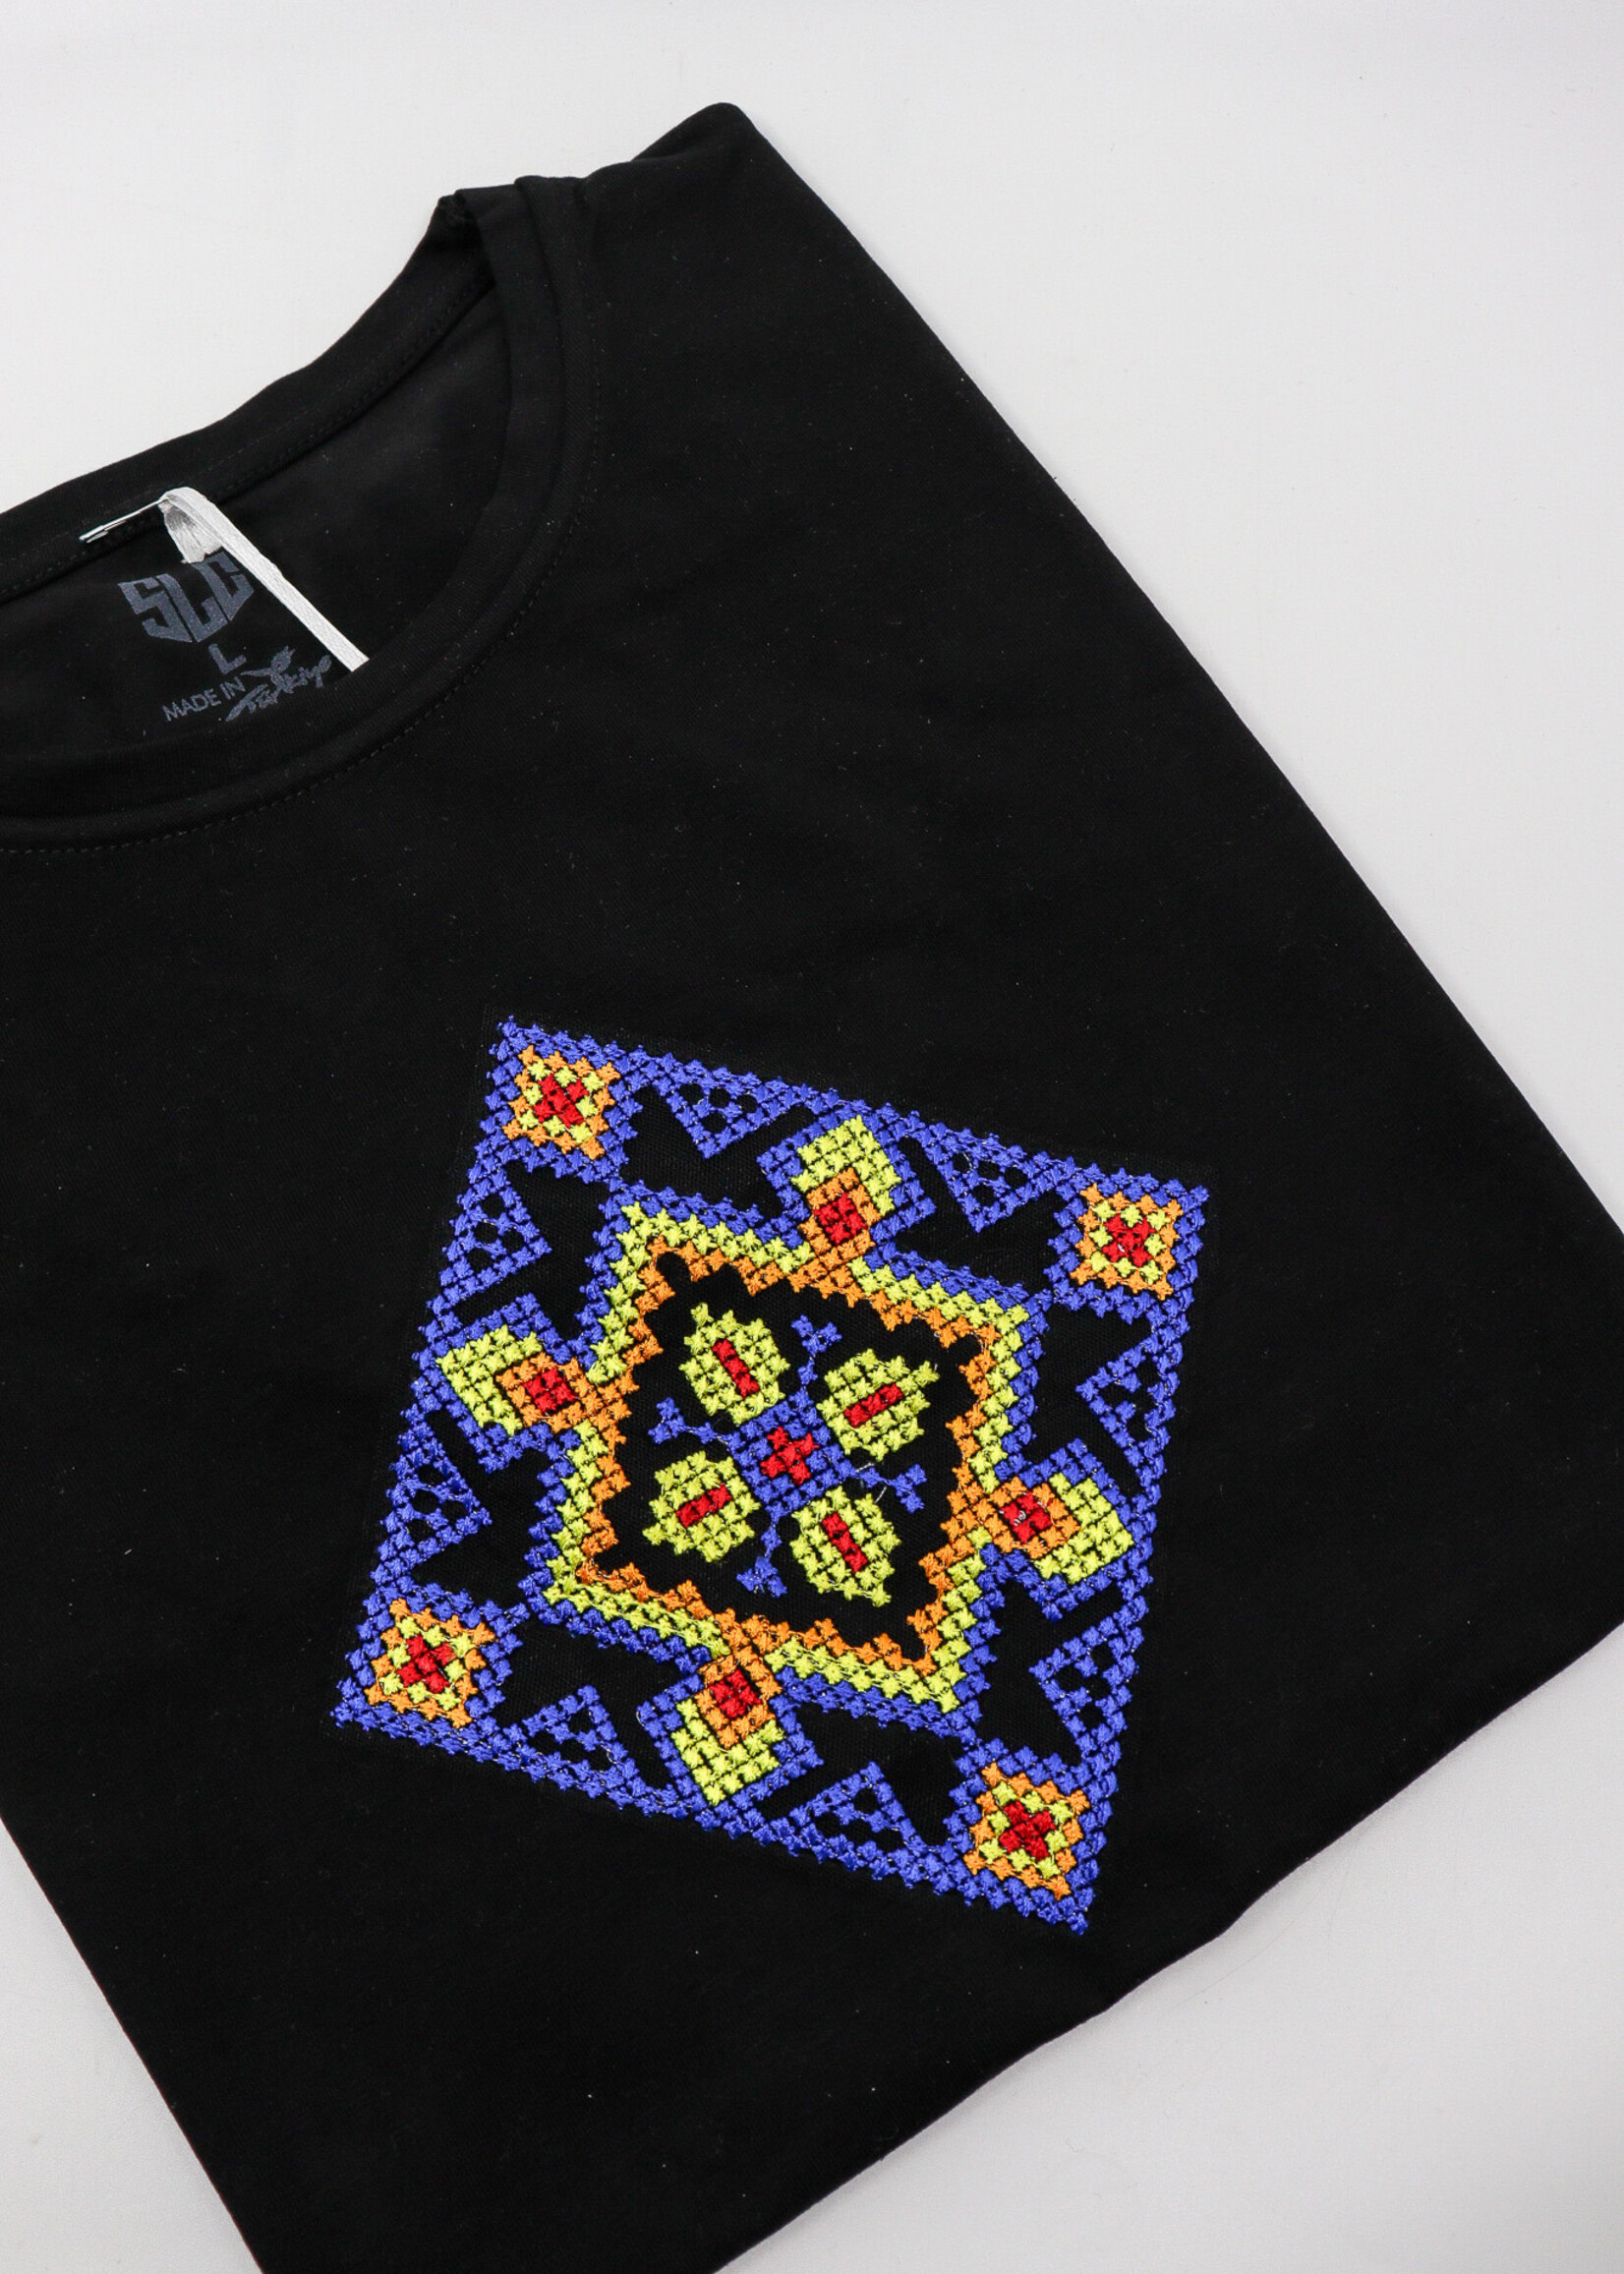 APPAREL - Black T-Shirt (W), with a diamond shaped colorful embroidery